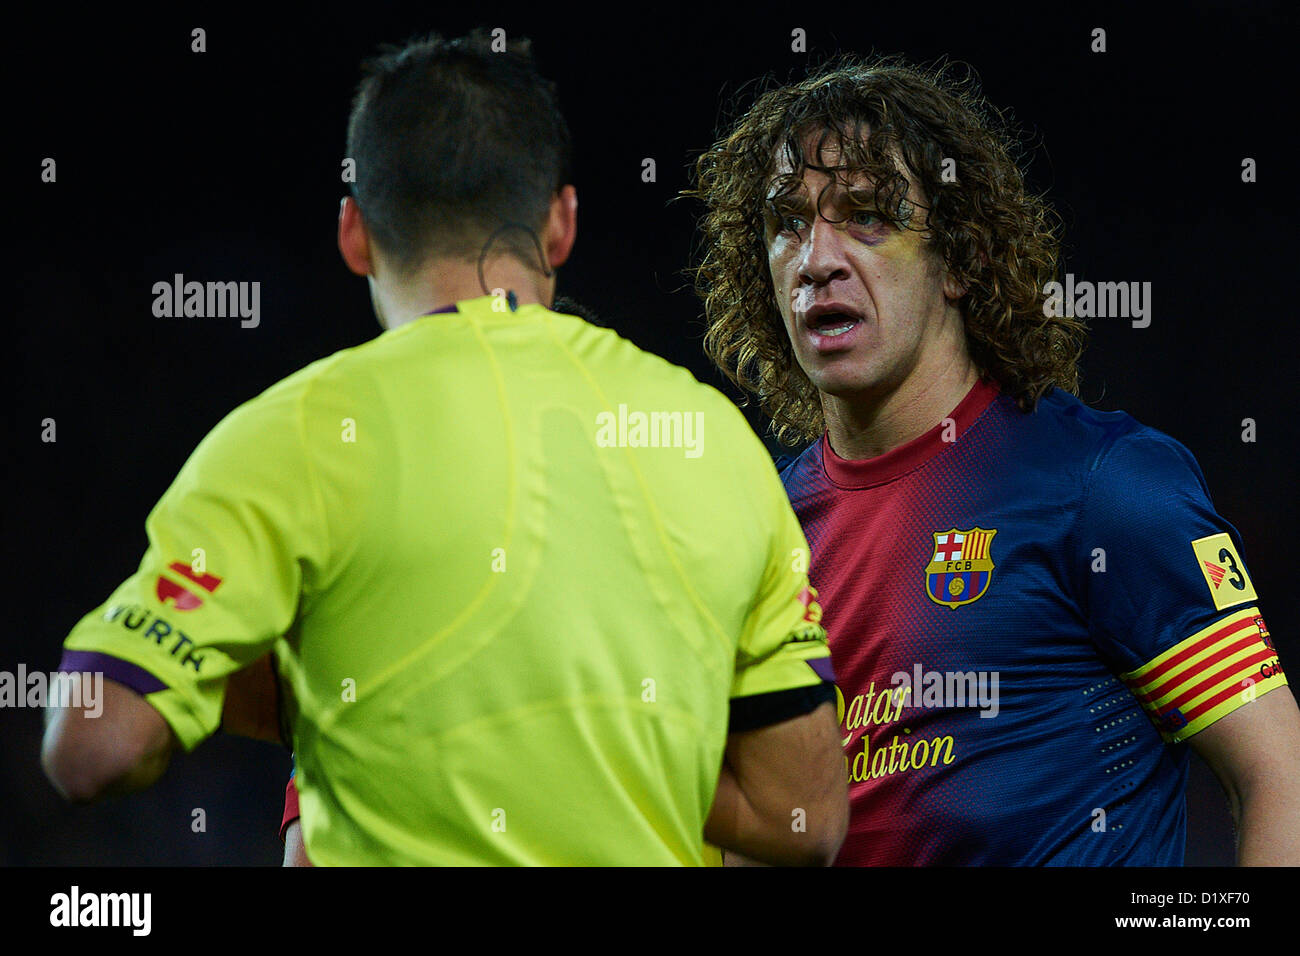 Carles Puyol (FC Barcelona) talk with the referee, during La Liga soccer match between FC Barcelona and RCD Espanyol, at the Camp Nou stadium in Barcelona, Spain, Sunday, January 6, 2013. Foto: S.Lau Stock Photo